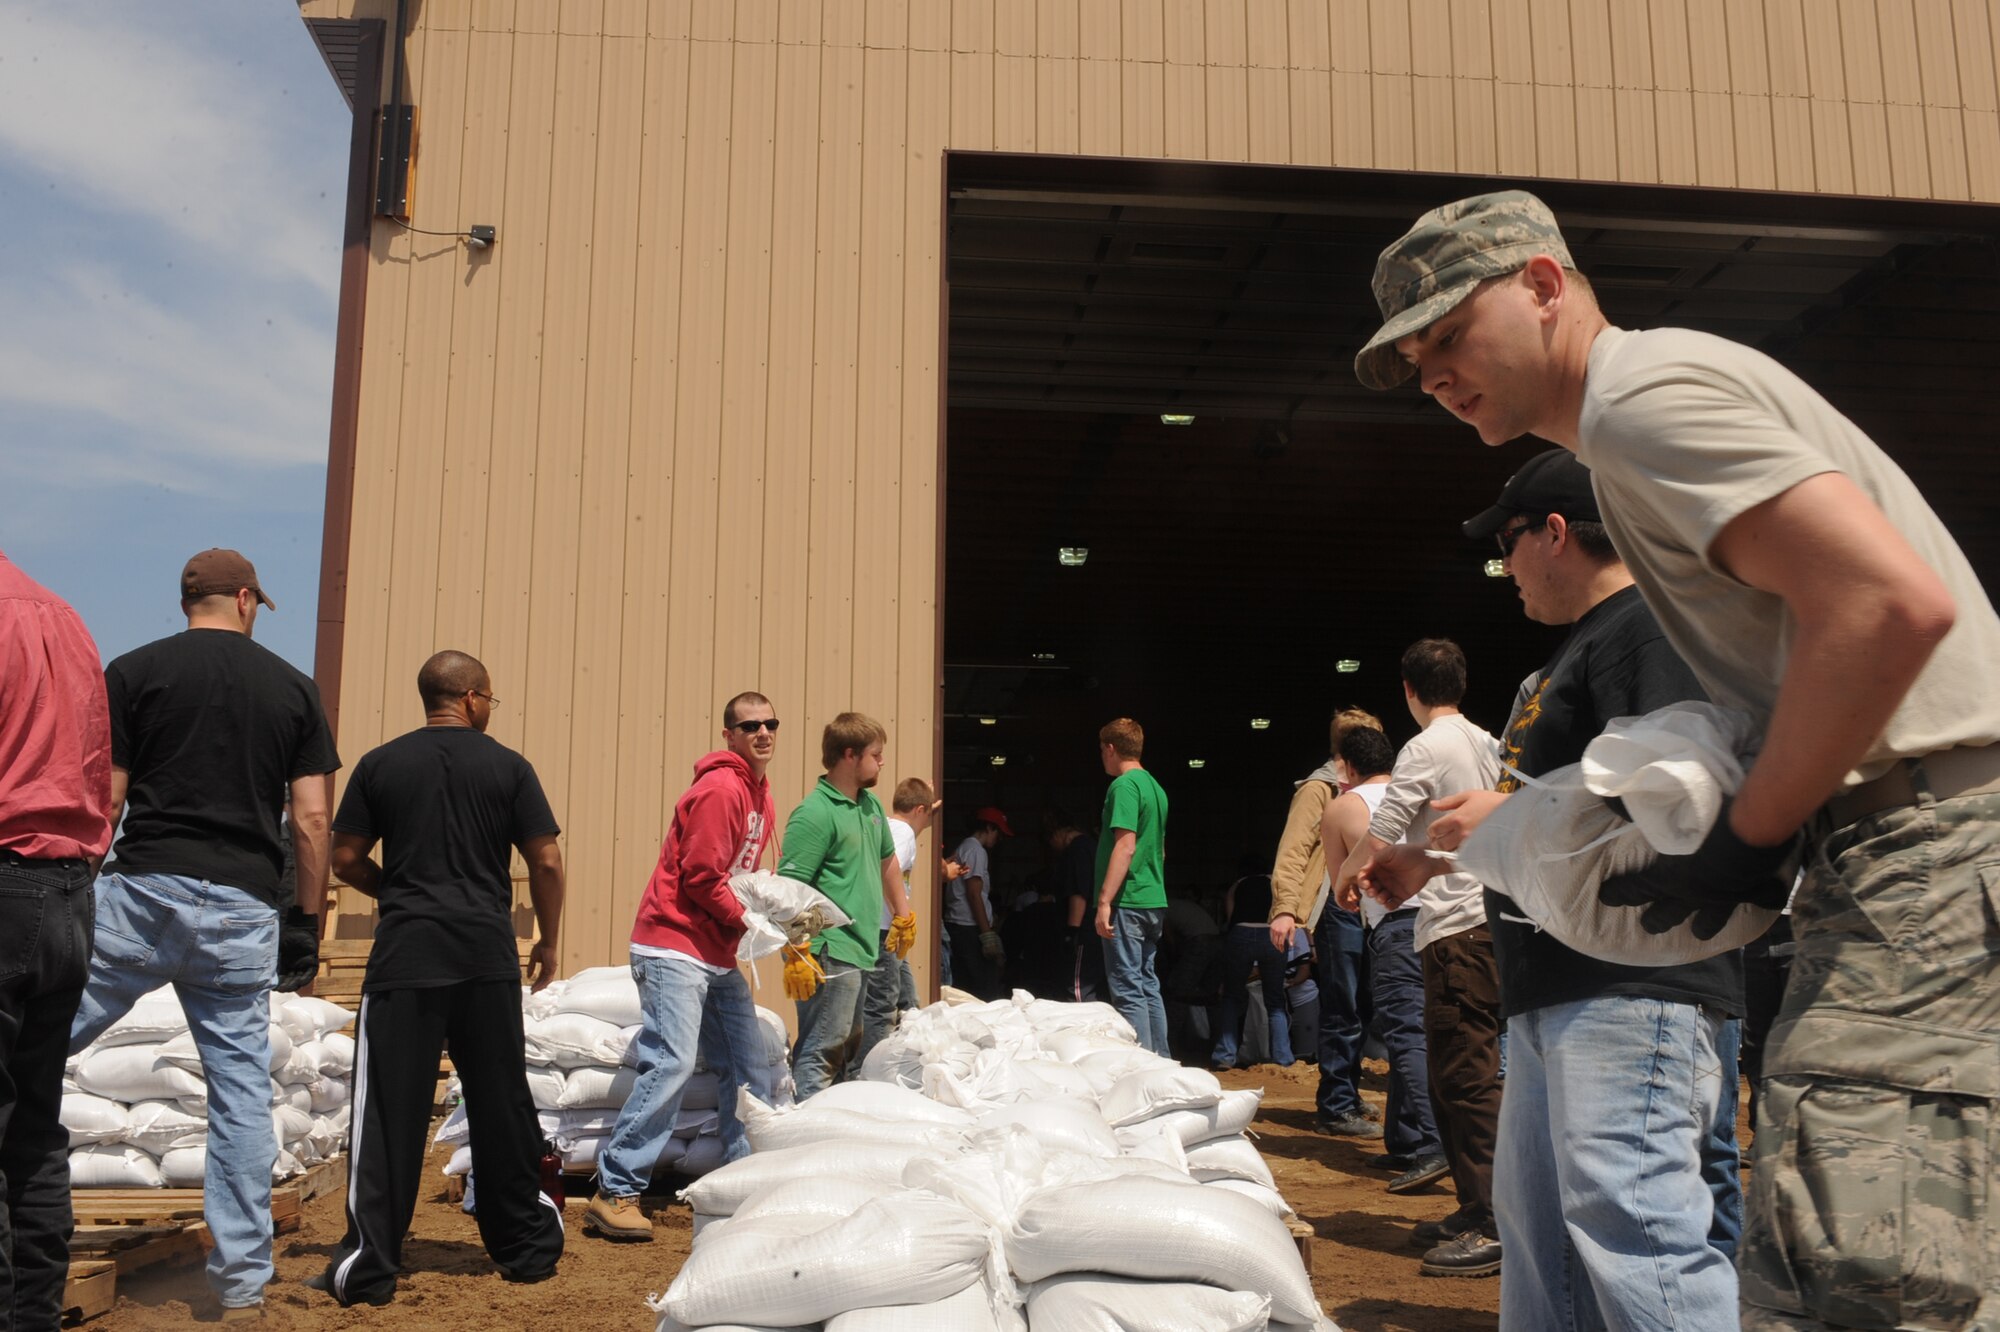 Airmen and local citizens work together to prepare sandbags for the incoming floods June 1, 2011, in Minot, N.D. In preparation for possible flooding, the city of Minot, with assistance from Airmen from Minot Air Force Base, North Dakota National Guard as well as many other organizations, are setting up secondary dikes along the river. The Souris River threatens to break the levies already in place, thousands of Minot citizens, including military members, their families and DOD civilians, have been forced to evacuate the area. (U.S. Air Force photo/Airman 1st Class Aaron-Forrest Wainwright)